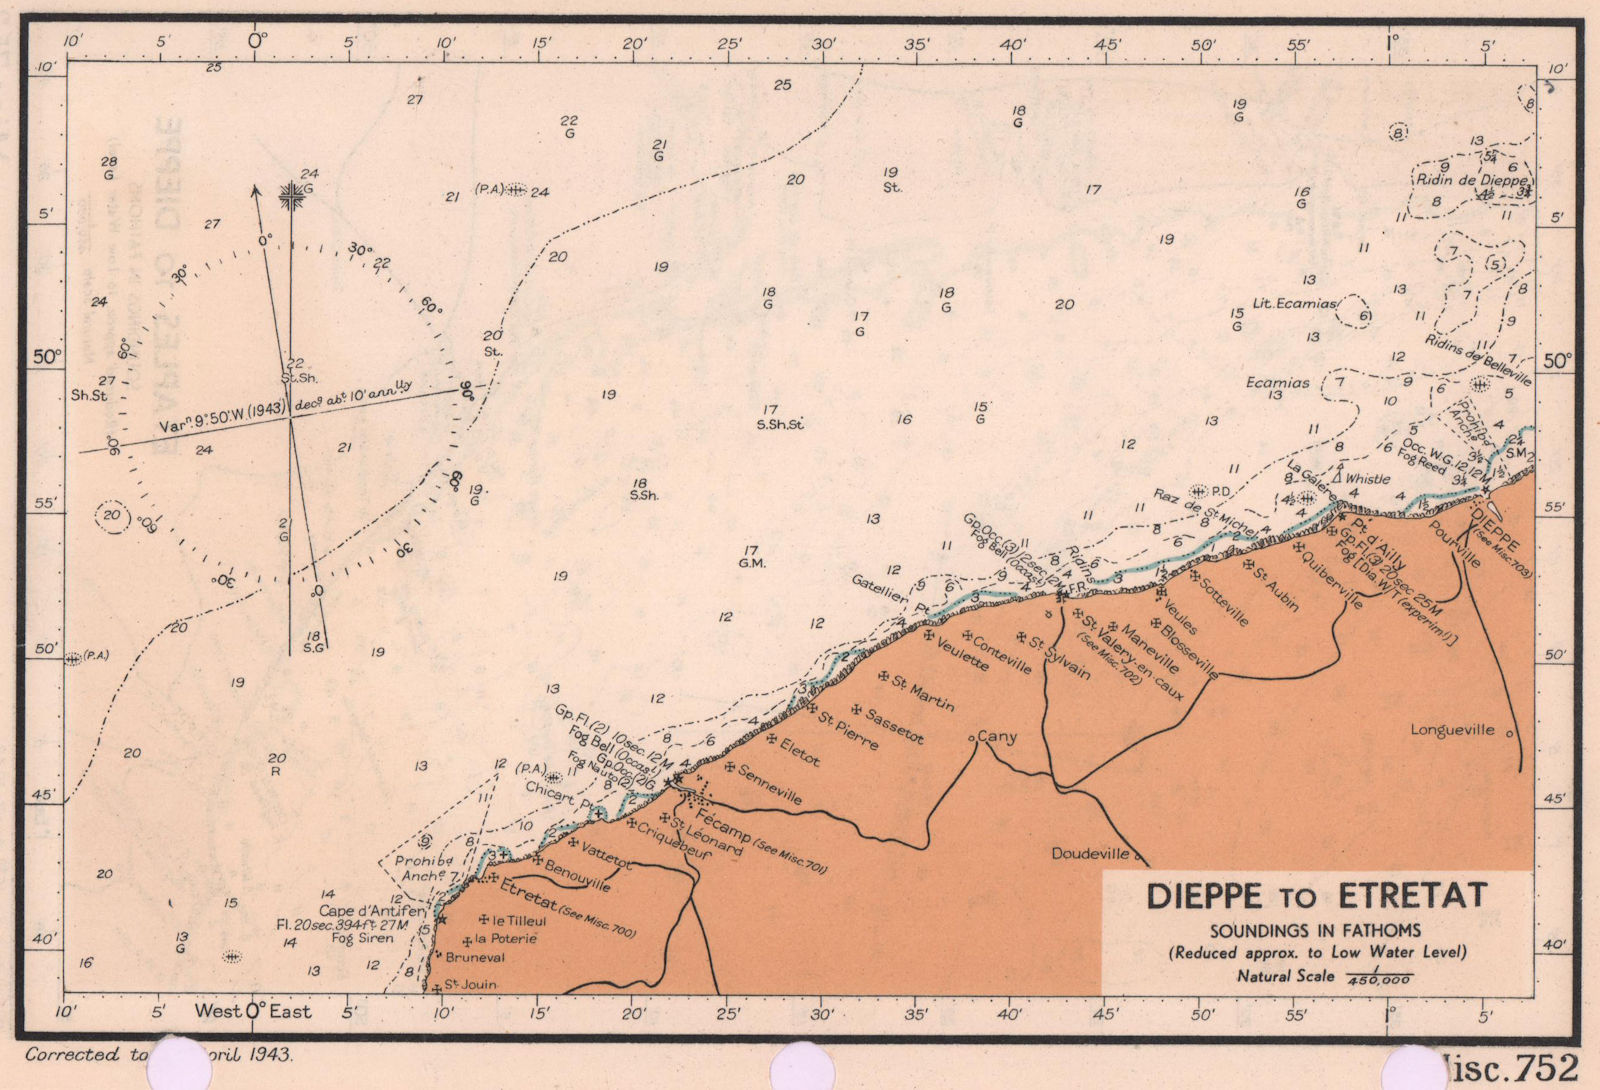 Dieppe to Étretat sea coast chart. D-Day planning map. ADMIRALTY 1943 old